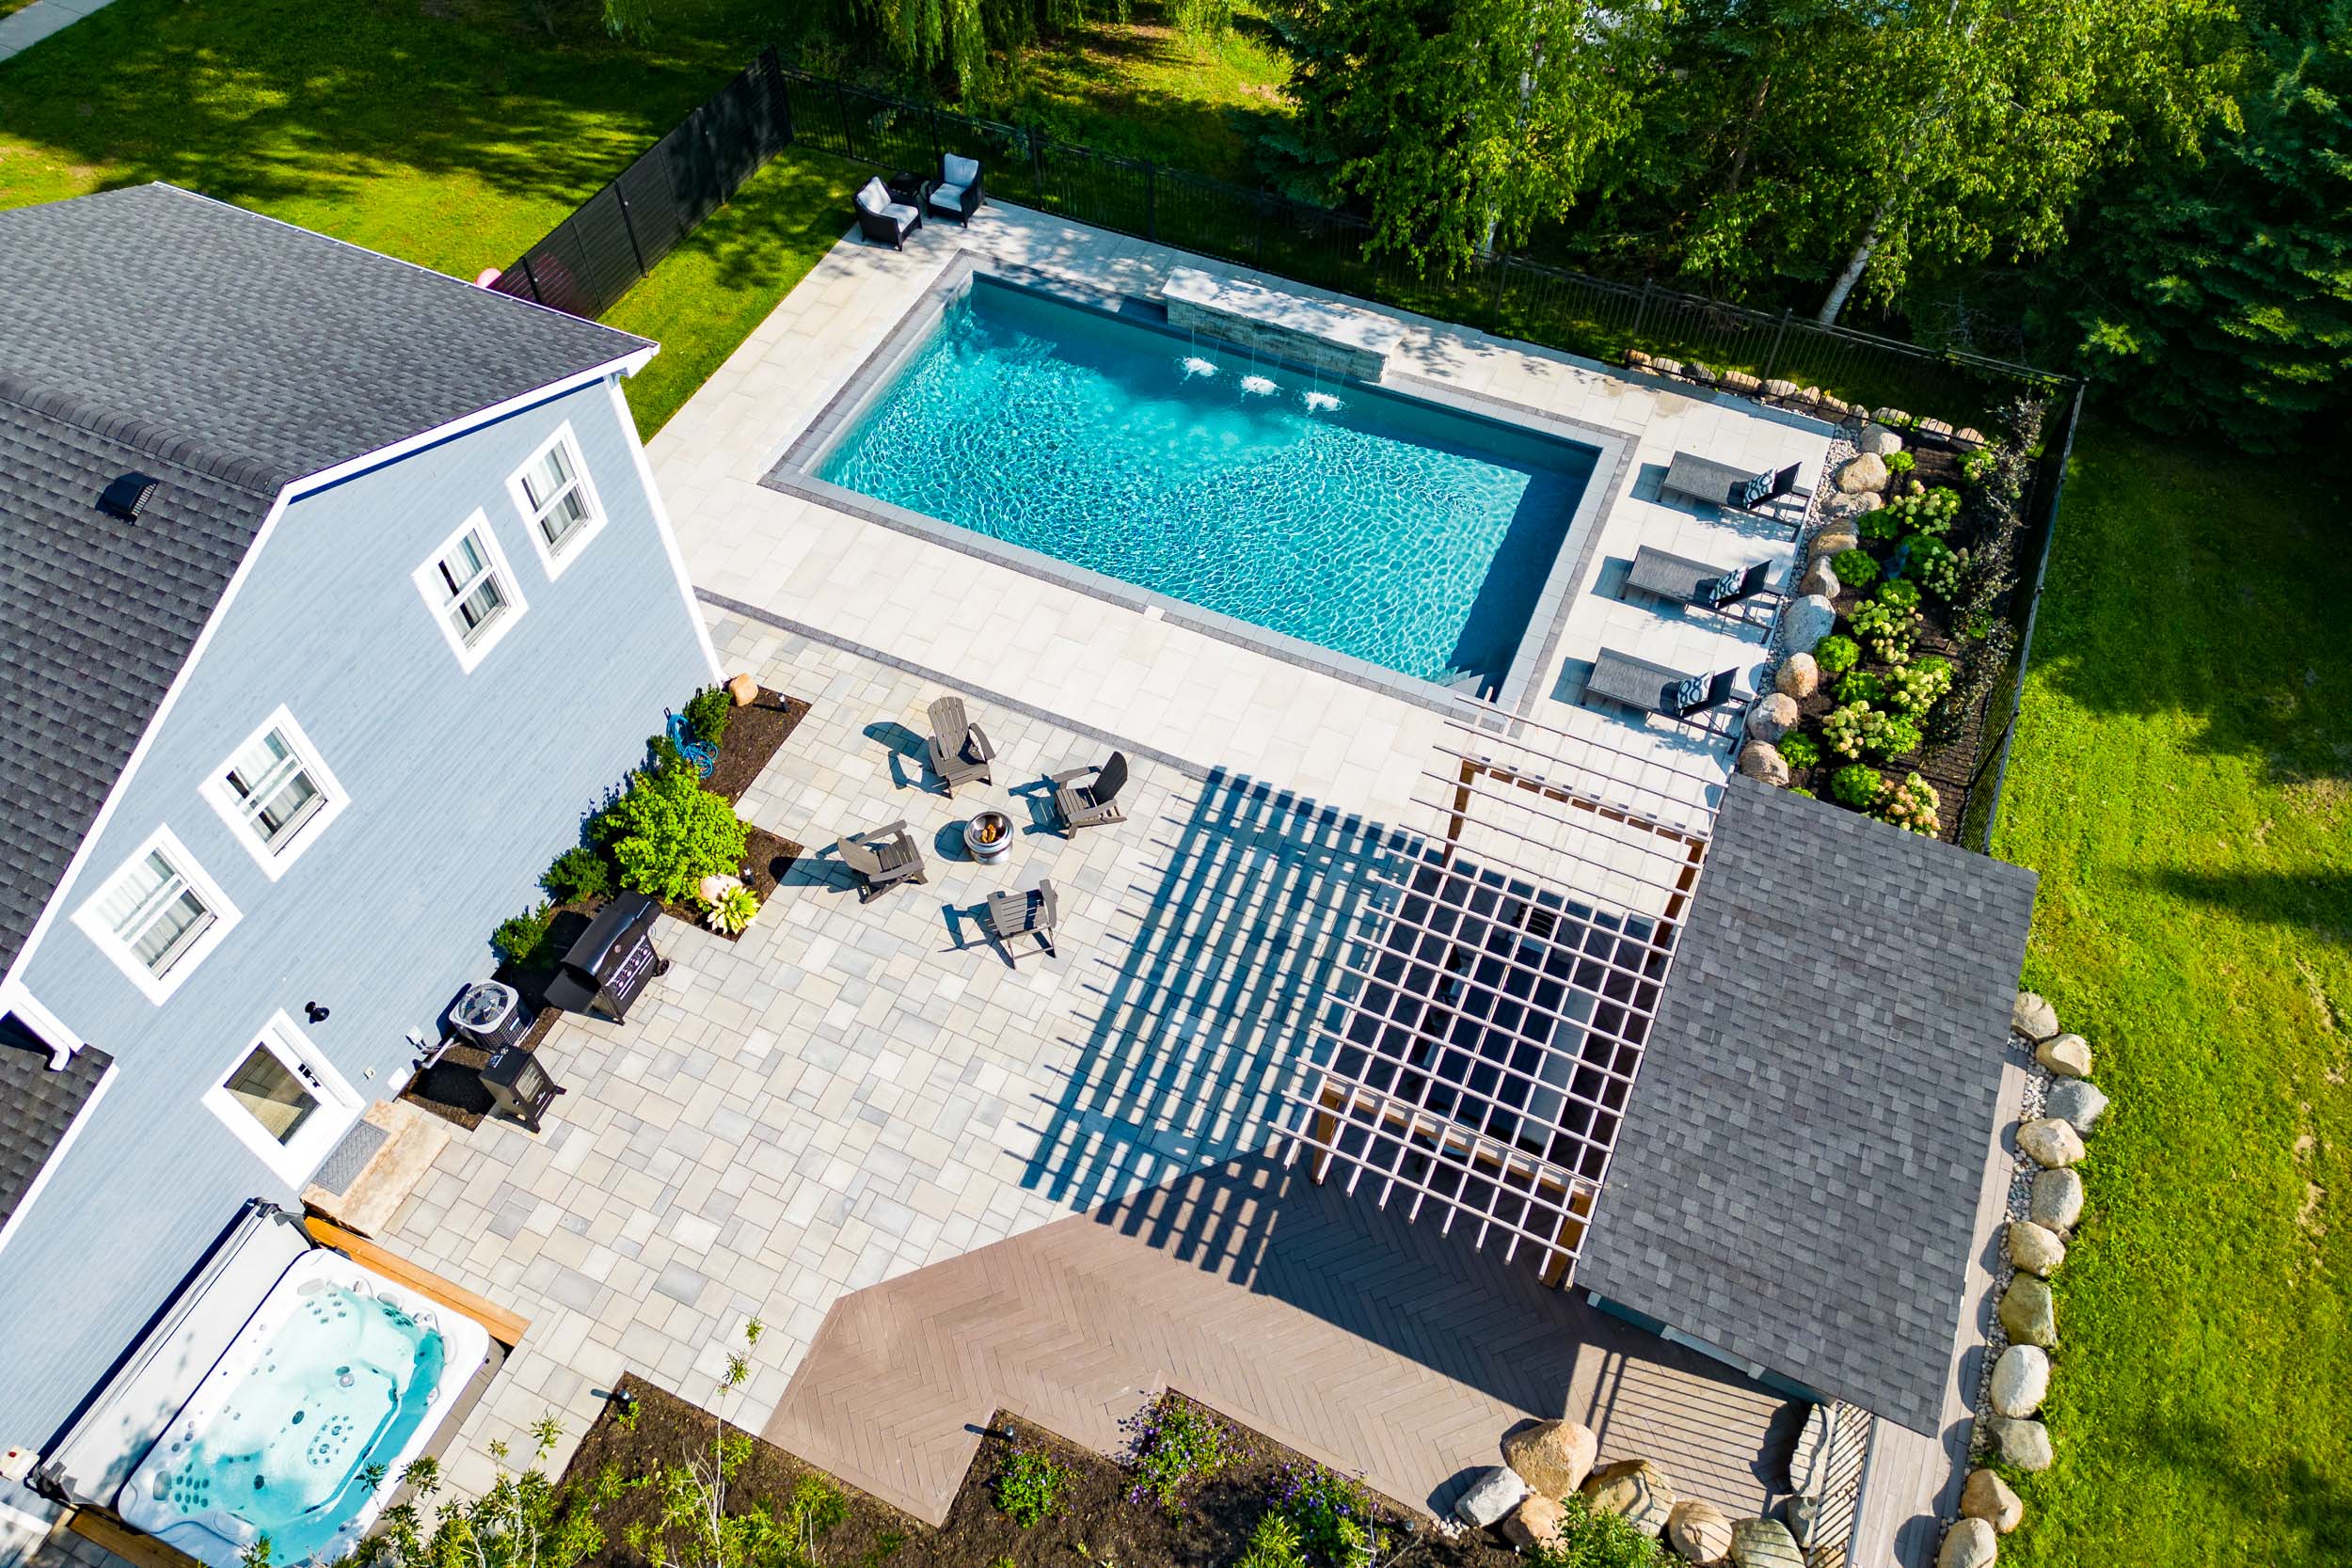 An aerial view of a residential backyard with a swimming pool, hot tub, patio, outdoor furniture, and a manicured lawn surrounded by a fence.